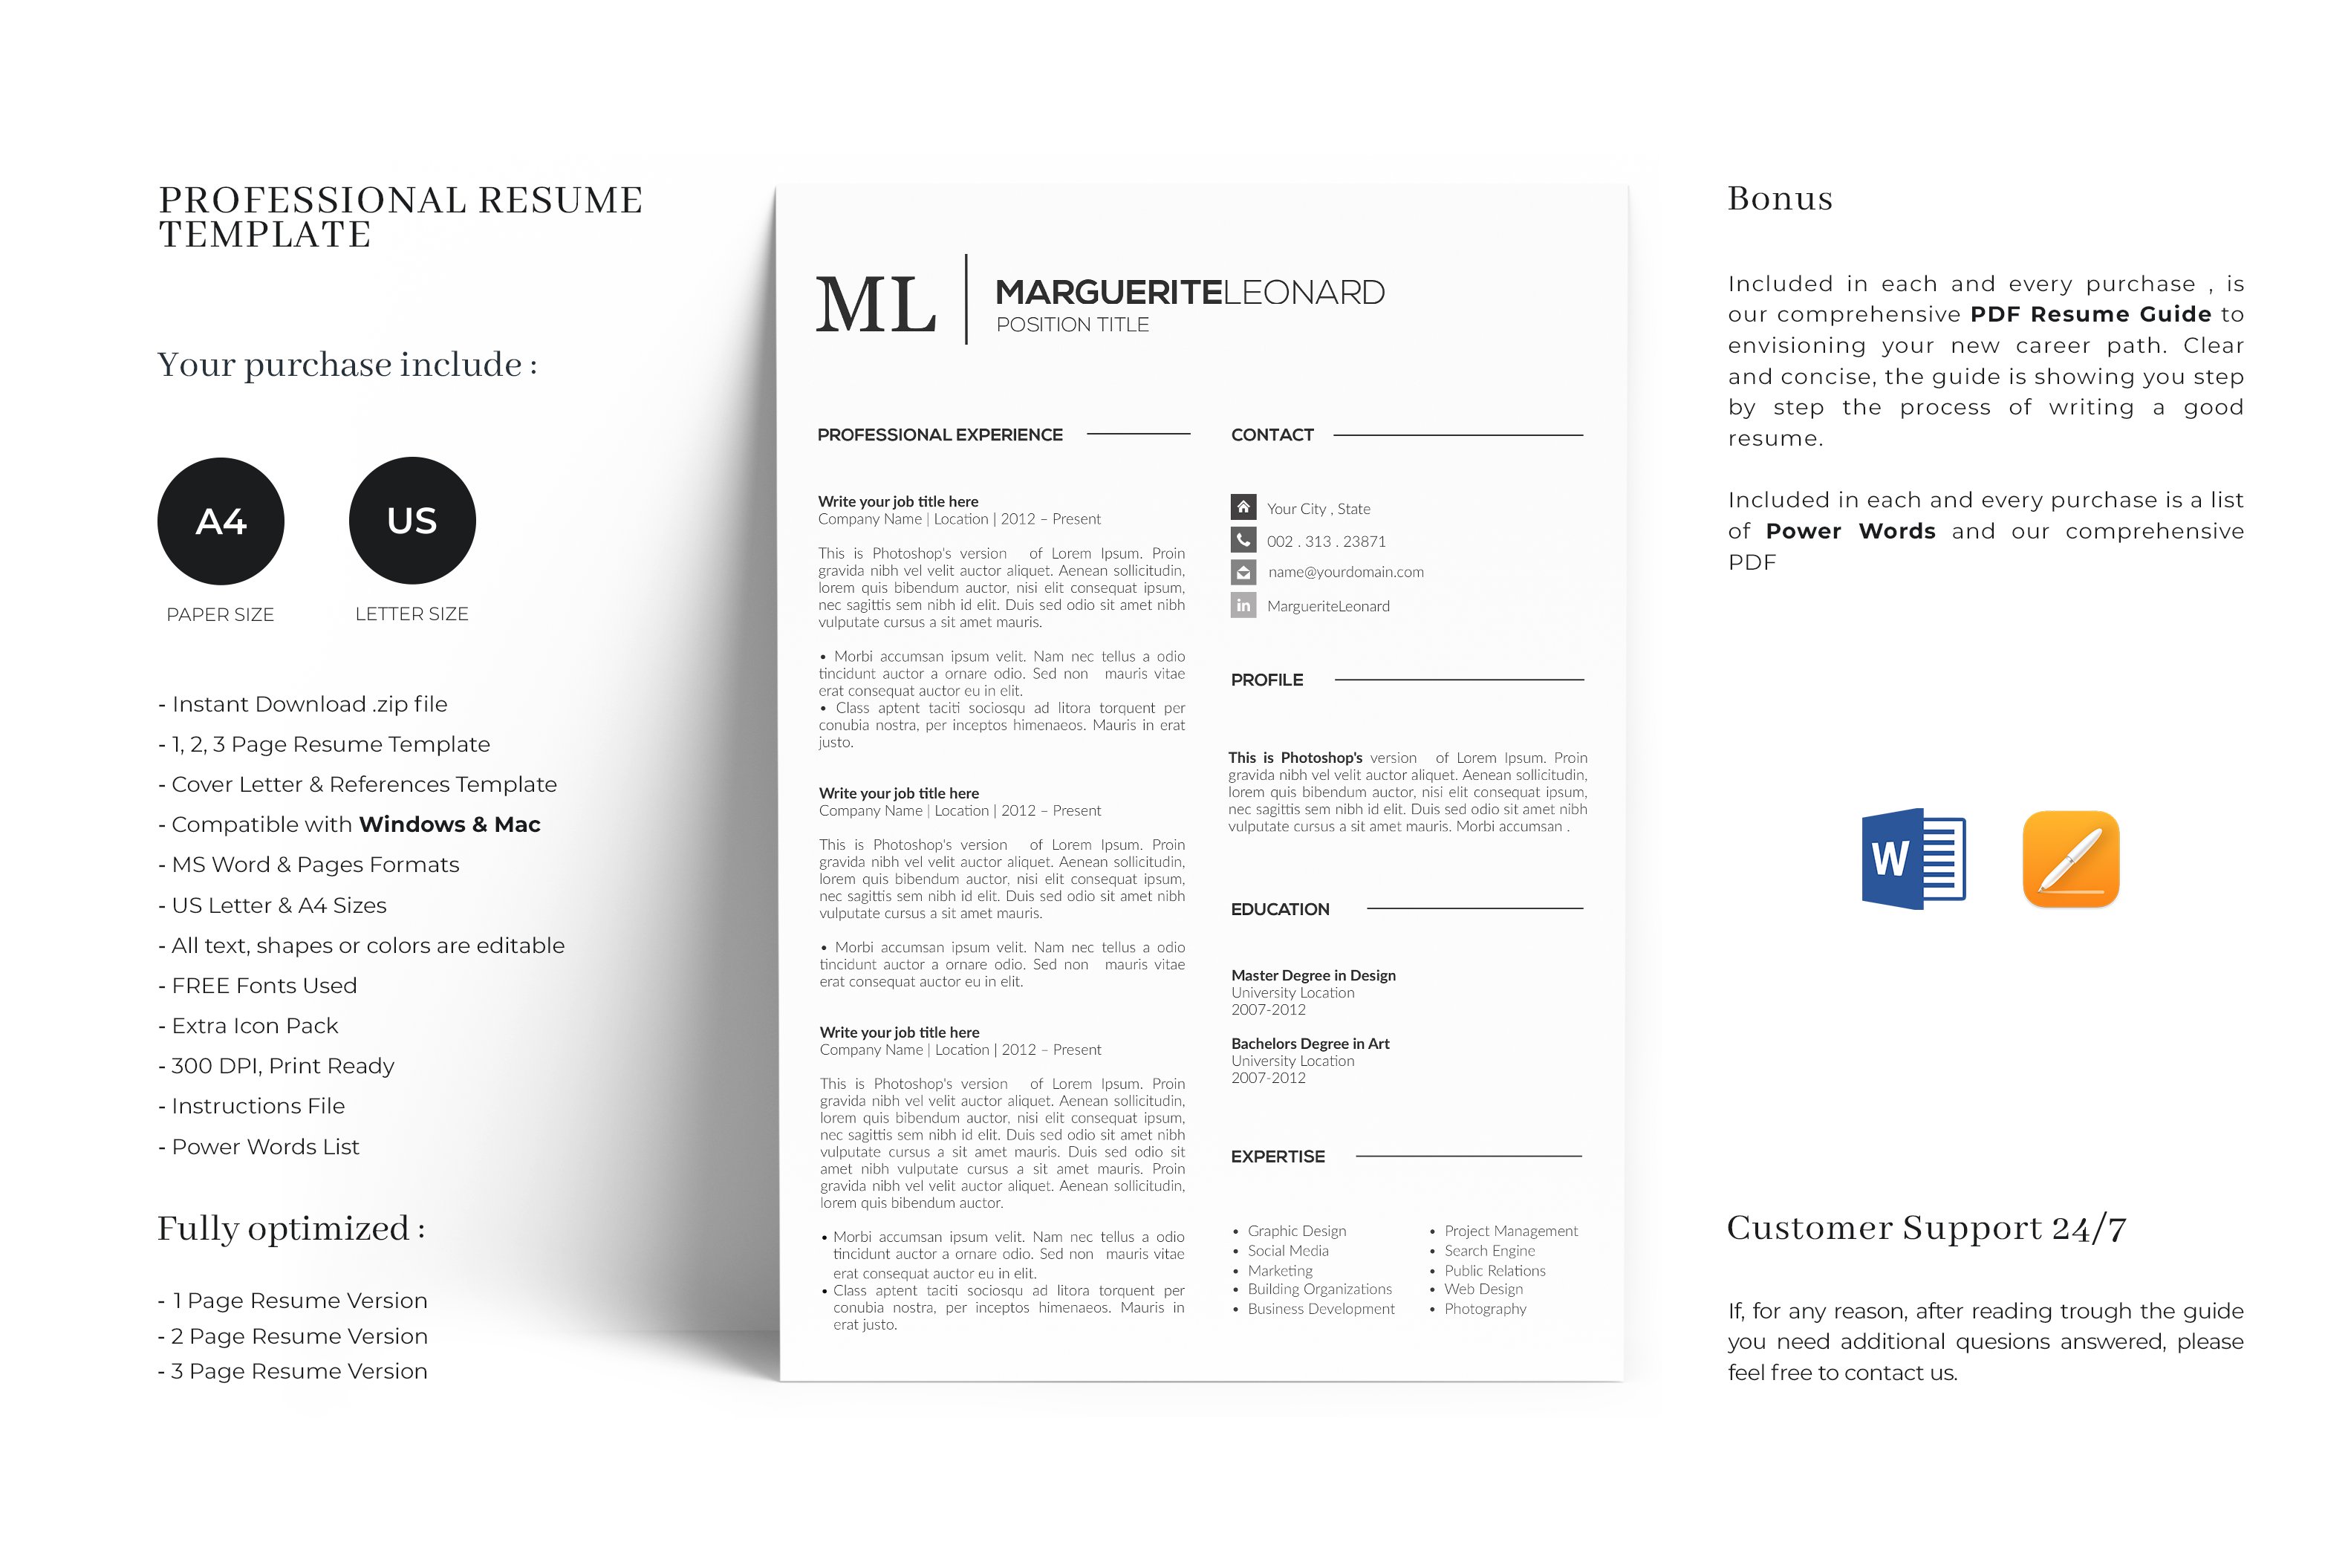 Resume compatible with Word & Pages cover image.